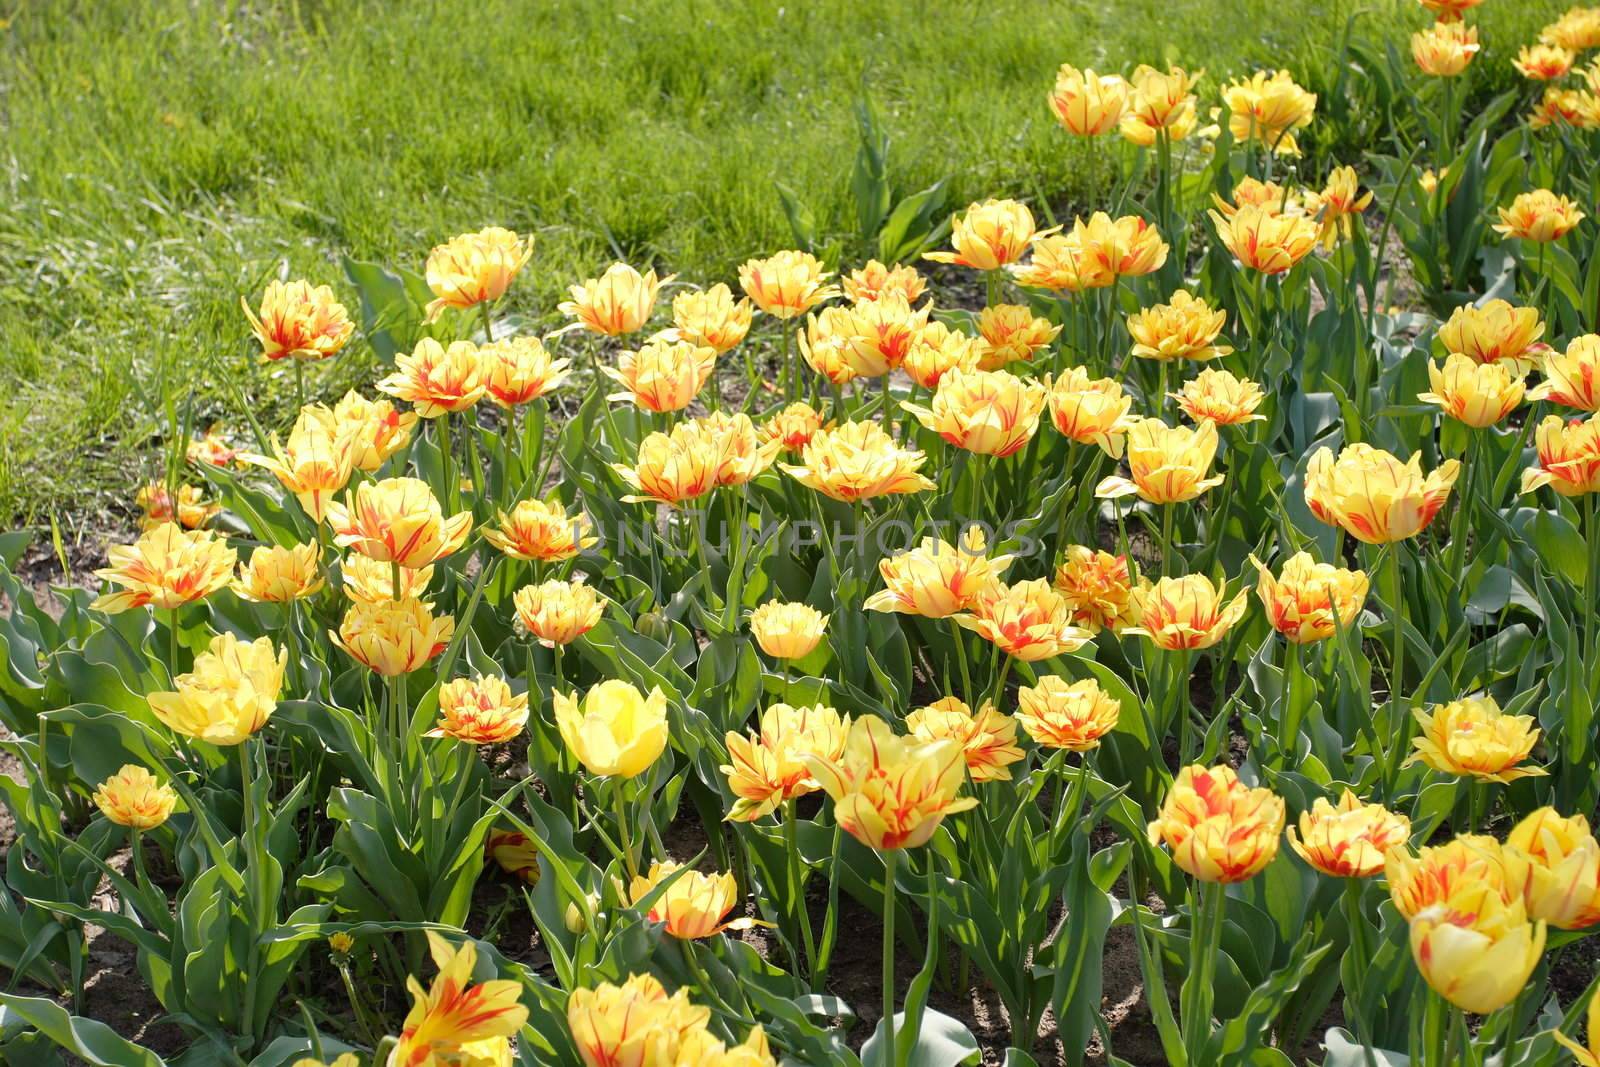 flower bed of yellow tulips in the park